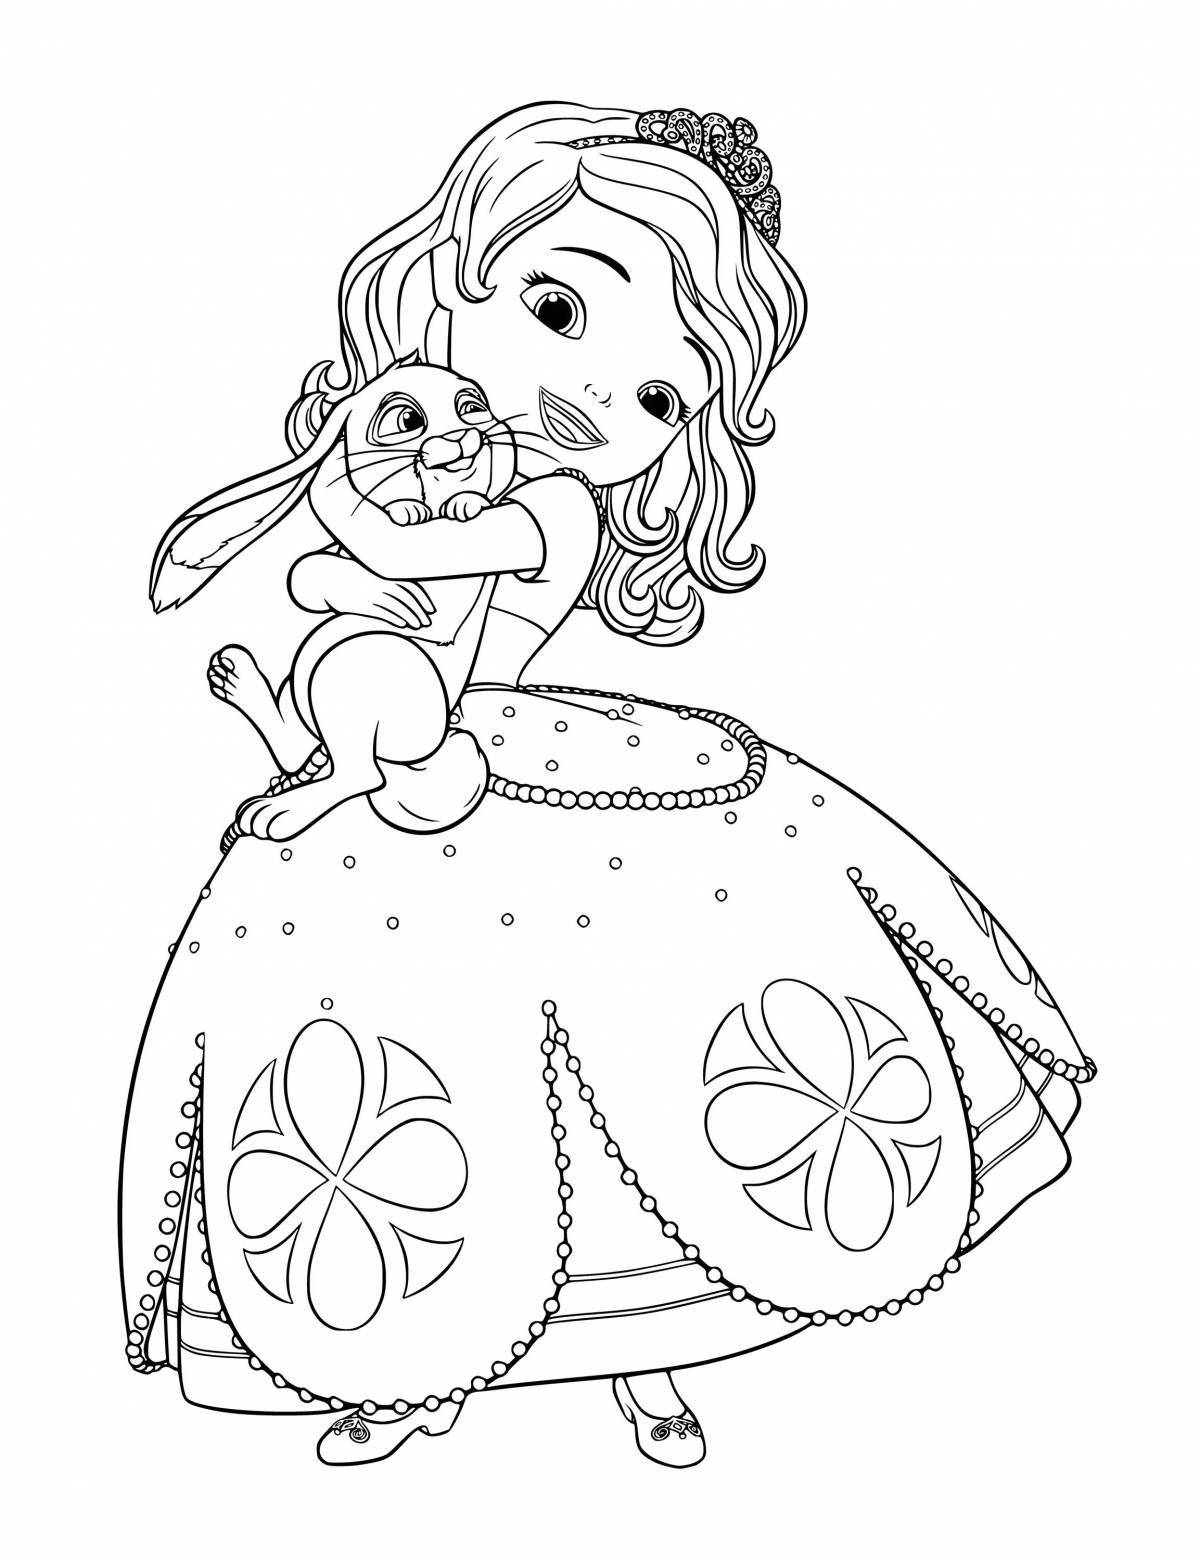 Violent coloring page 4 for girls